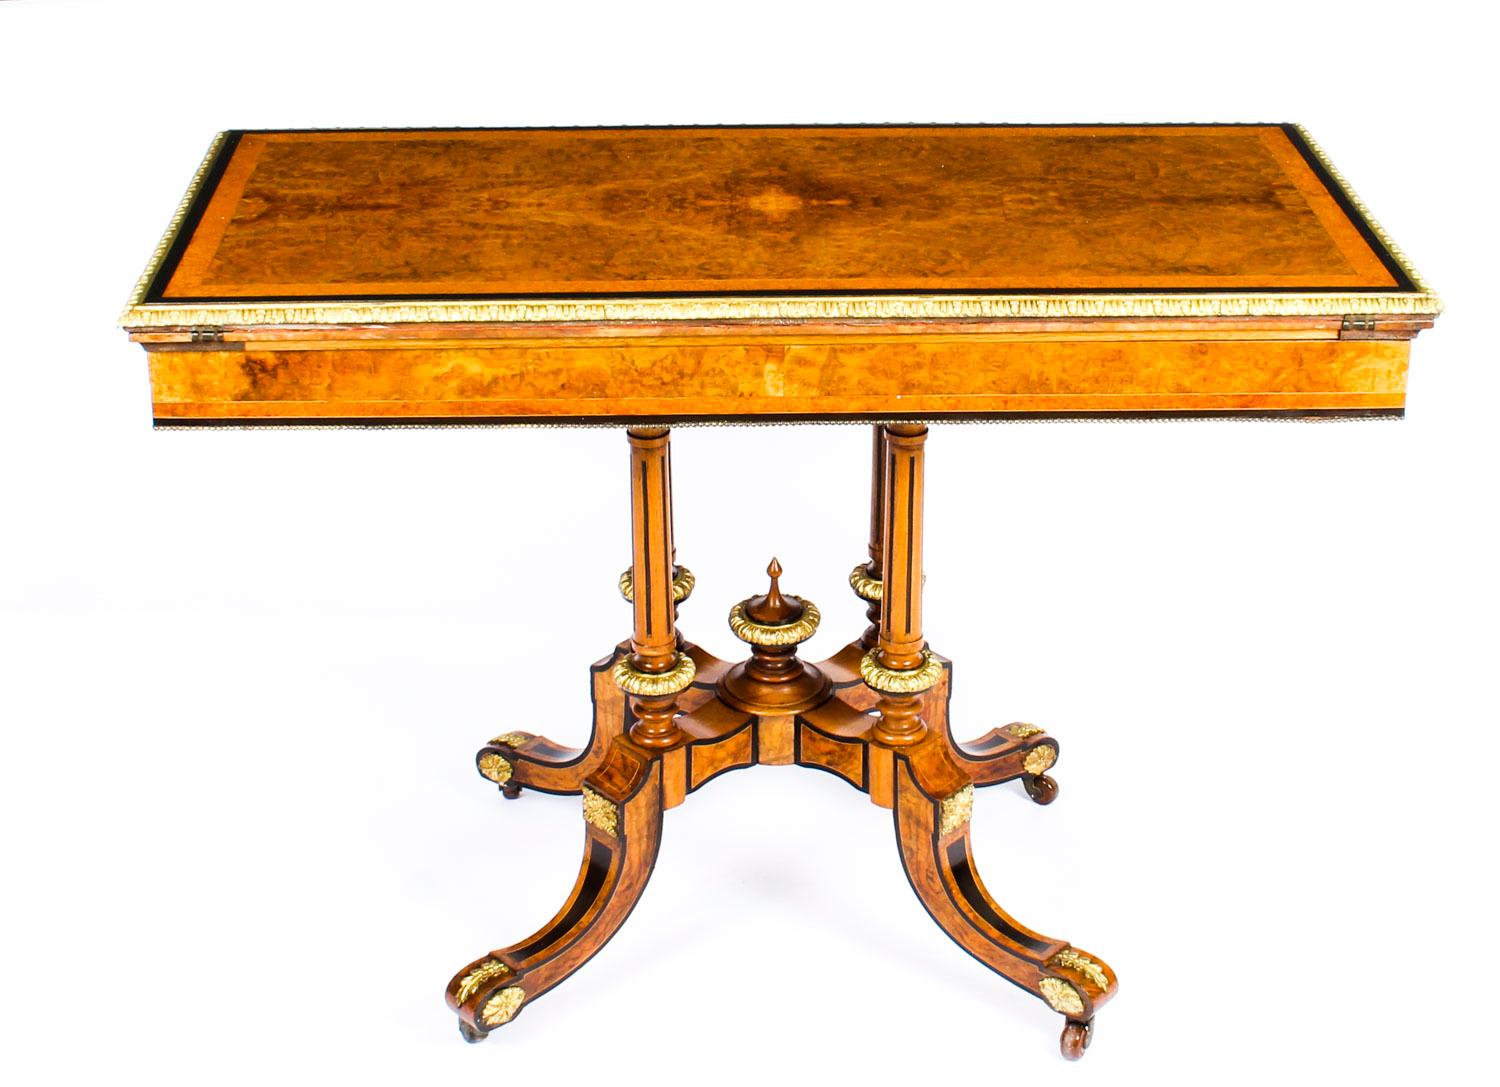 This is an attractive English antique Victorian burr walnut and ebonised card table, with impressed makers mark of the renowned cabinet makers Holland & Sons, circa 1860 in date.

This gorgeous card table is crafted from the most beautiful burr